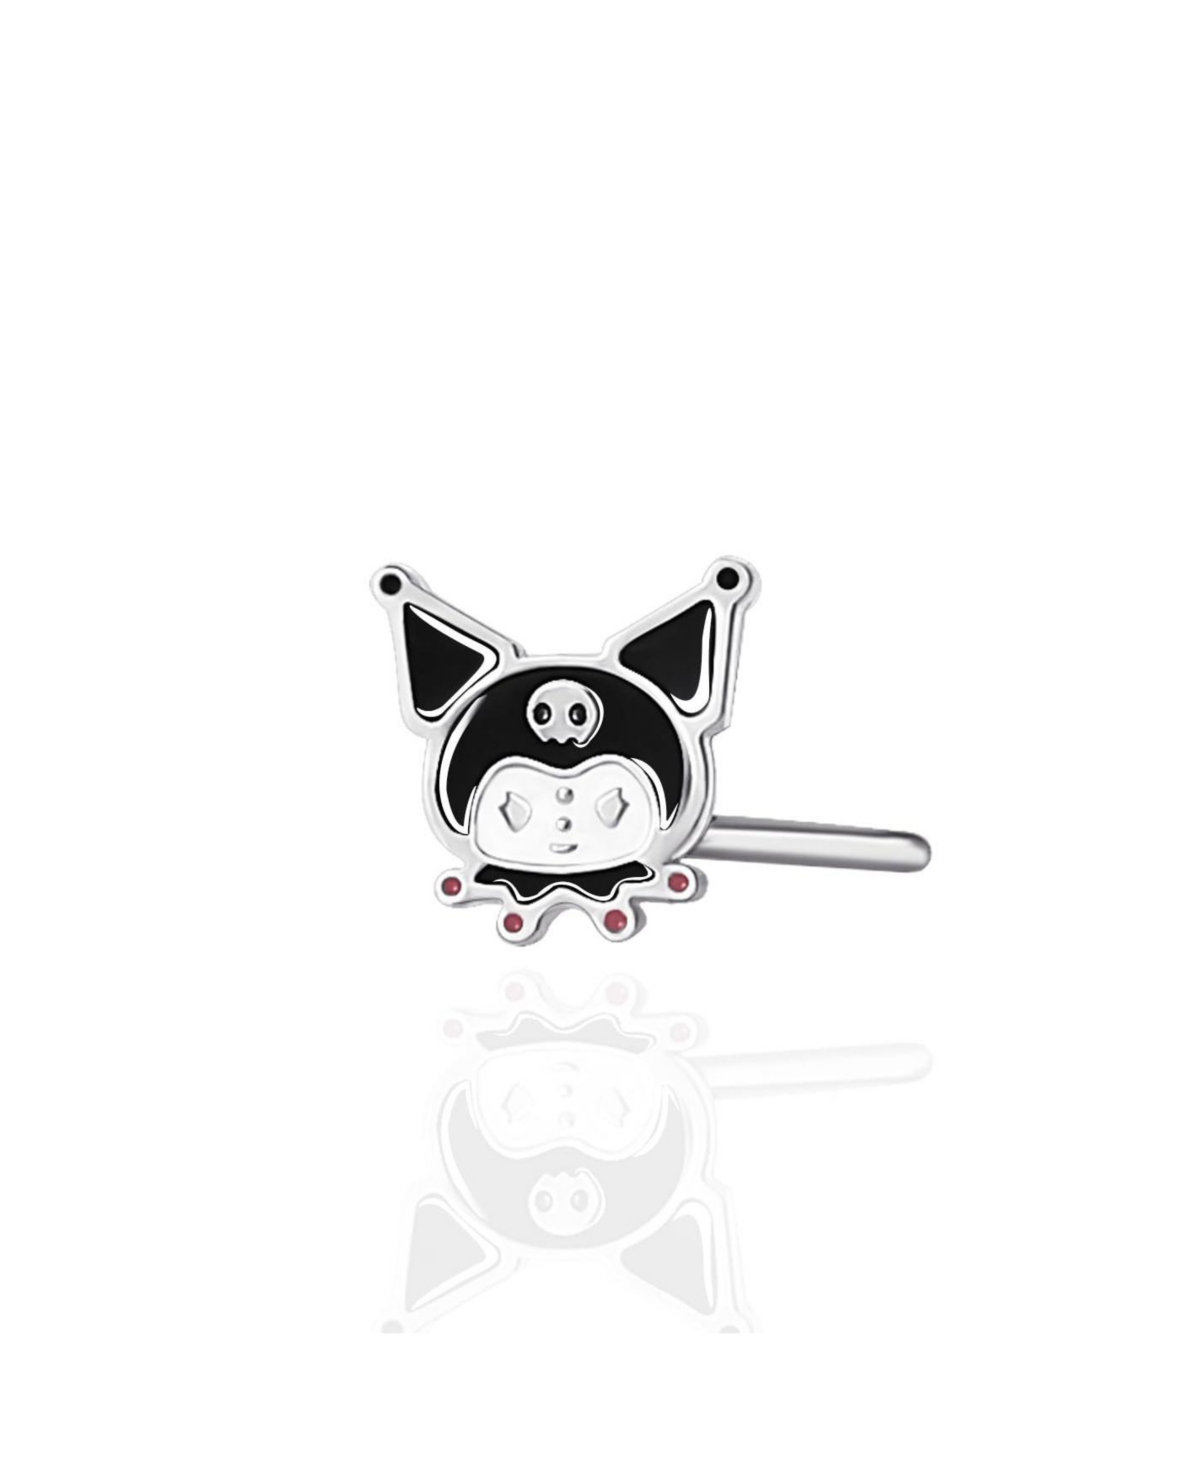 Sanrio Hello Kitty Stainless Steel (316L) Nose Stud - Kuromi, Authentic Officially Licensed - Black